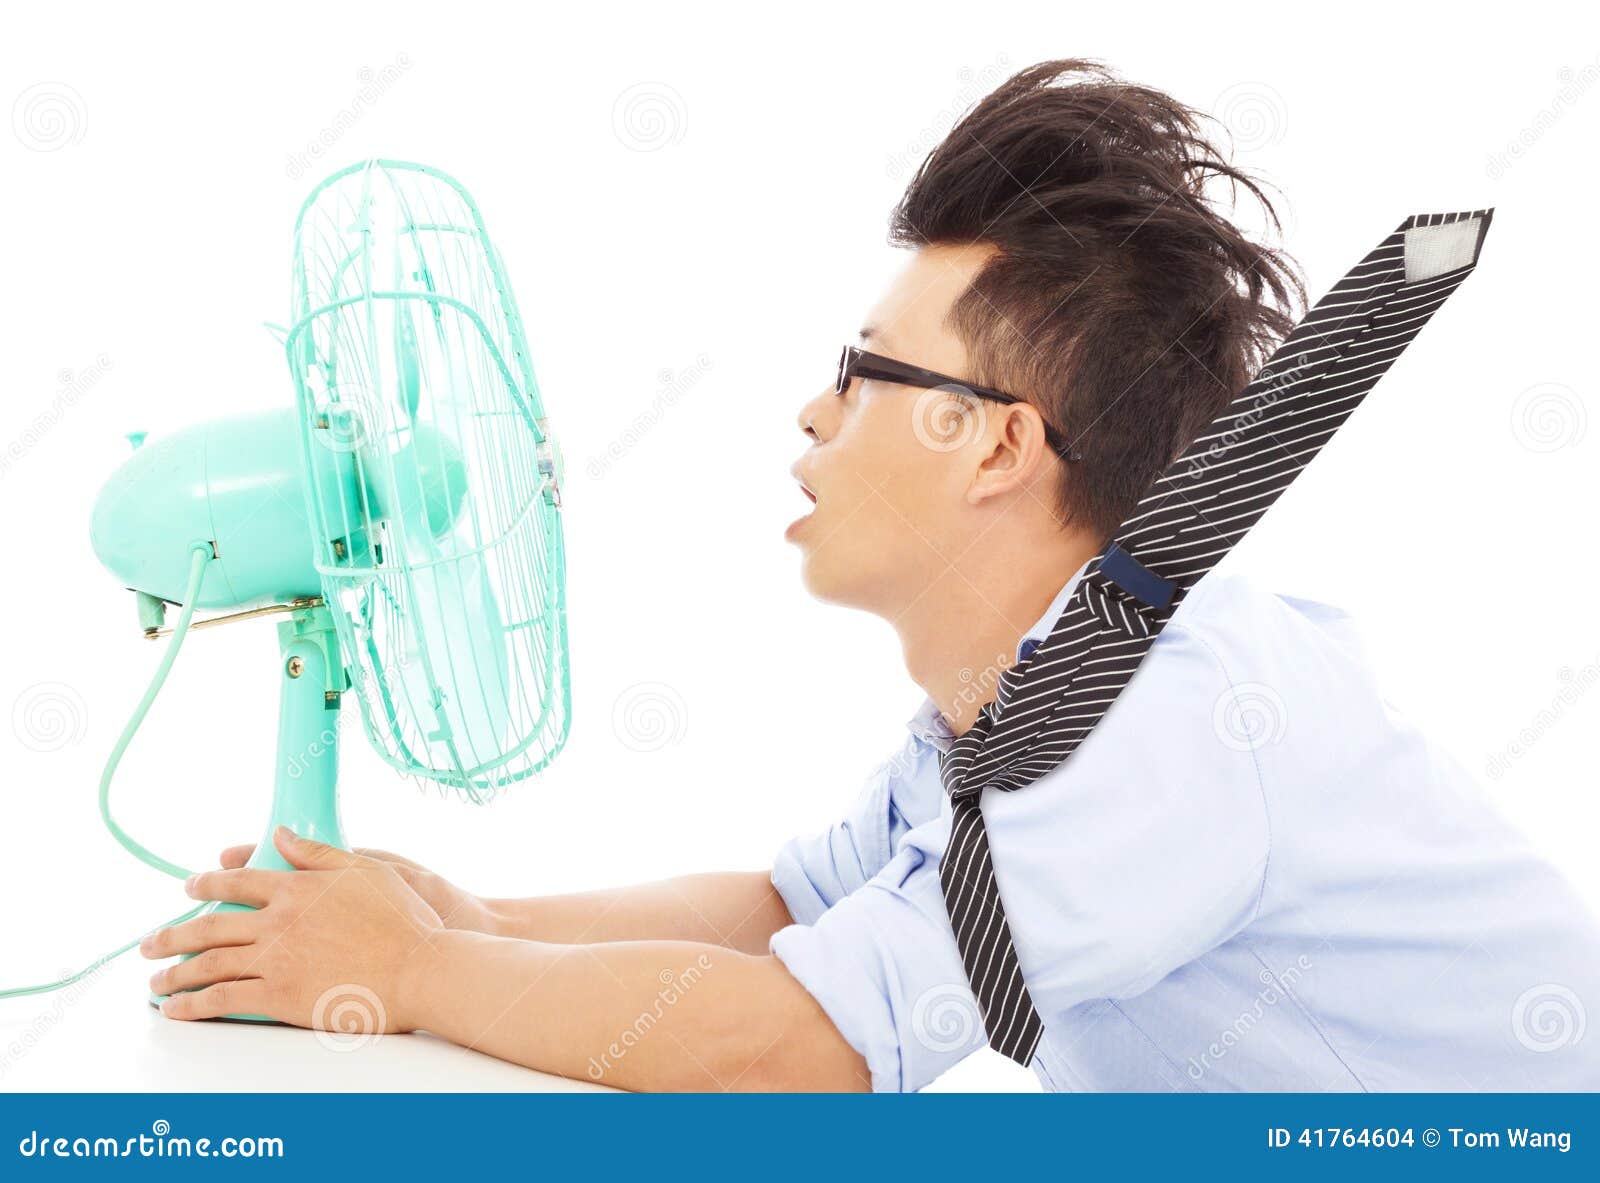 summer heat, business man use fans to cool down